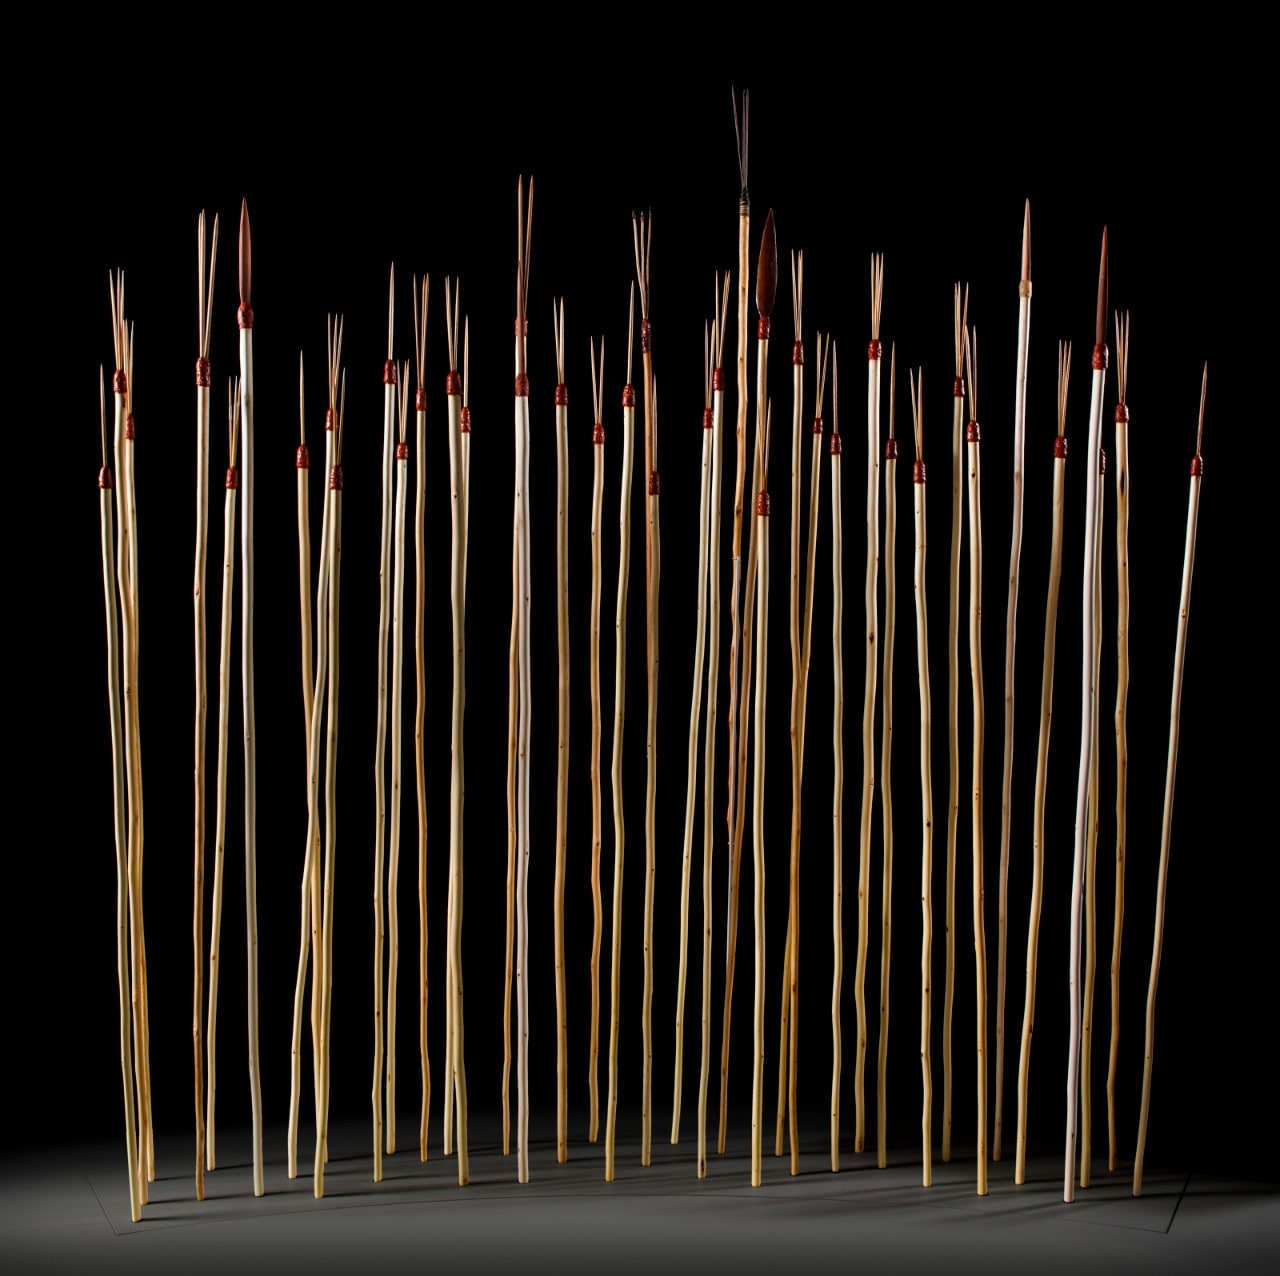 A display includes 37 contemporary spears on a dark background